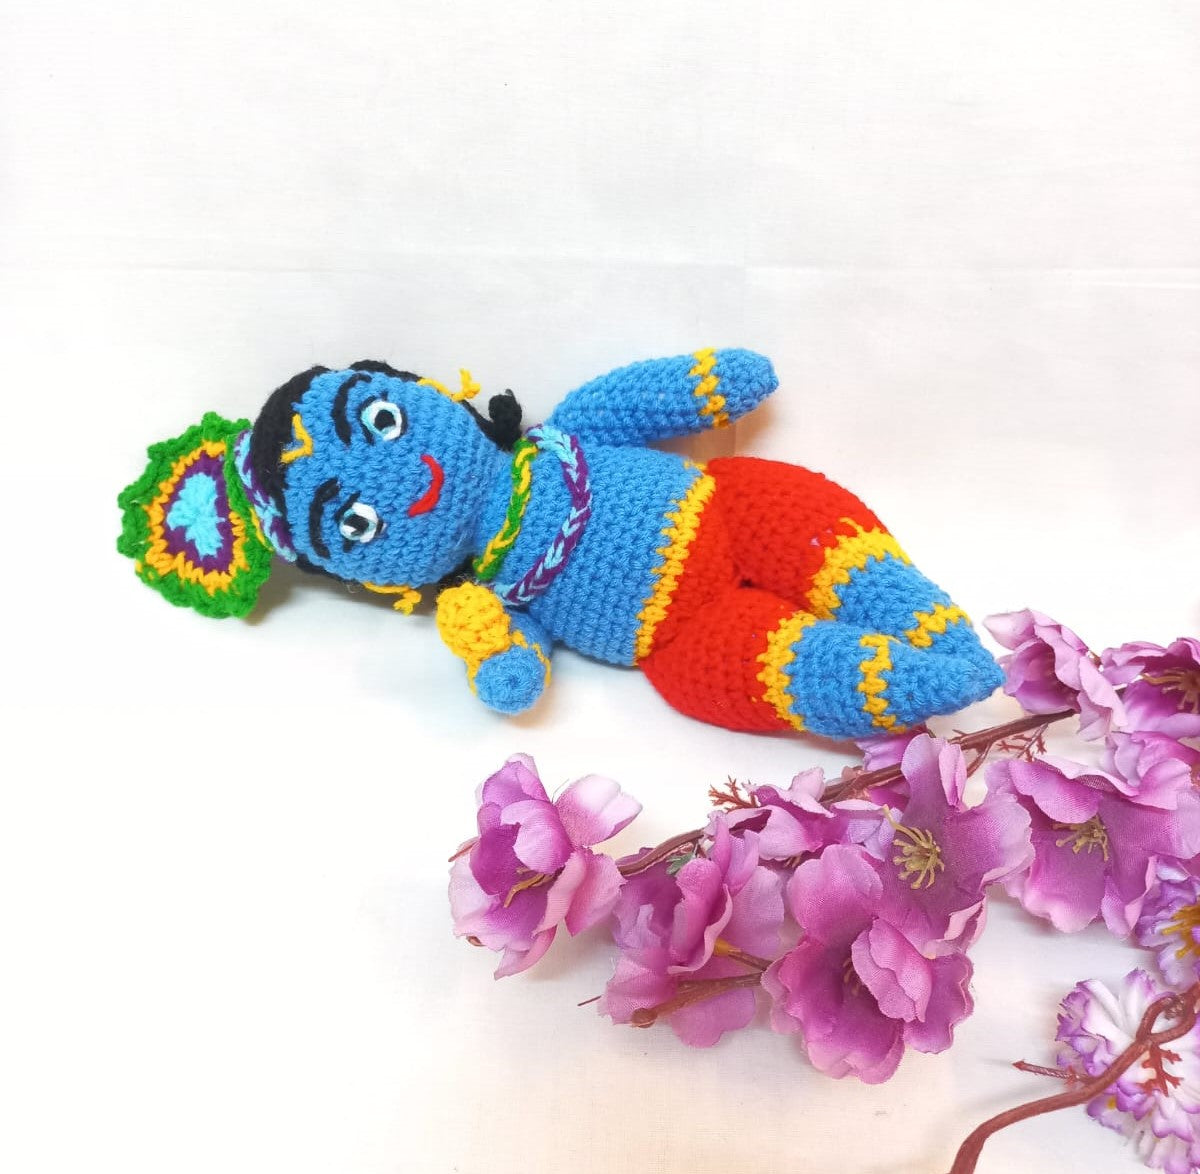 Gopal Divine Character - The Perfect Way to Show Your Love and Support